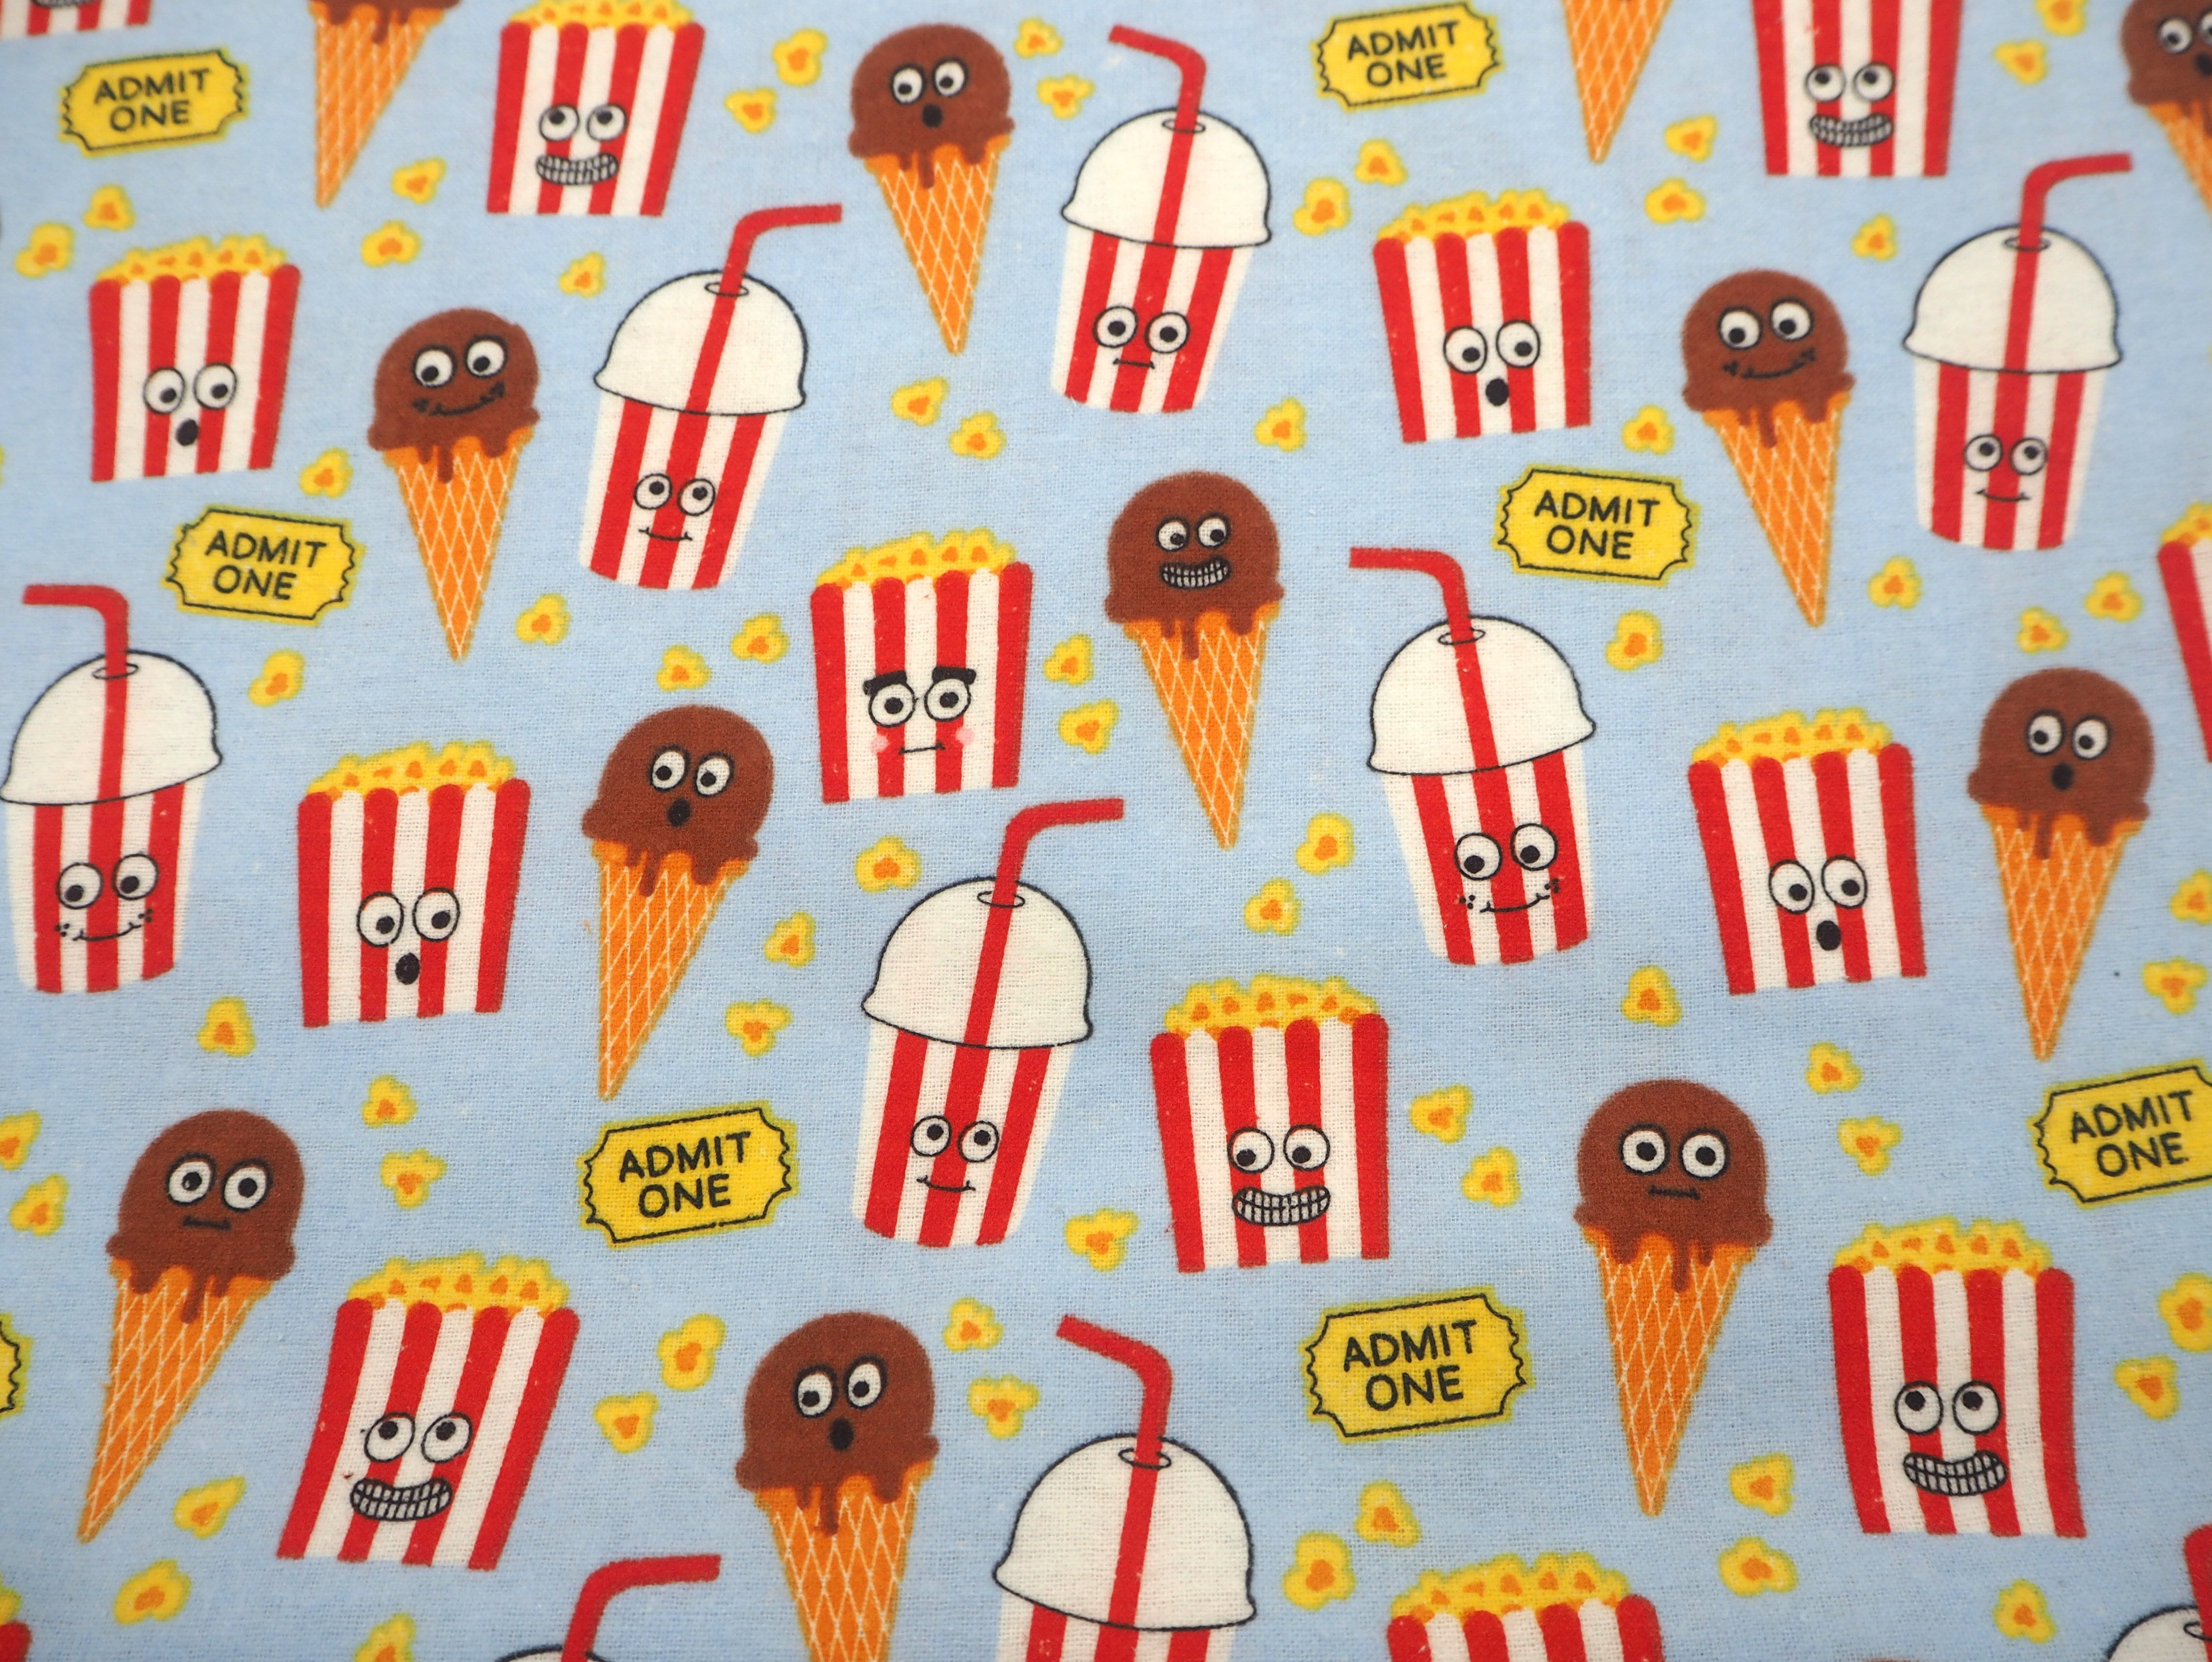 Fabric view of A Sack Of Wheat, featuring images of movie tickets, popcorn & ice-creams on soft blue flannelette, 100% cotton fabric